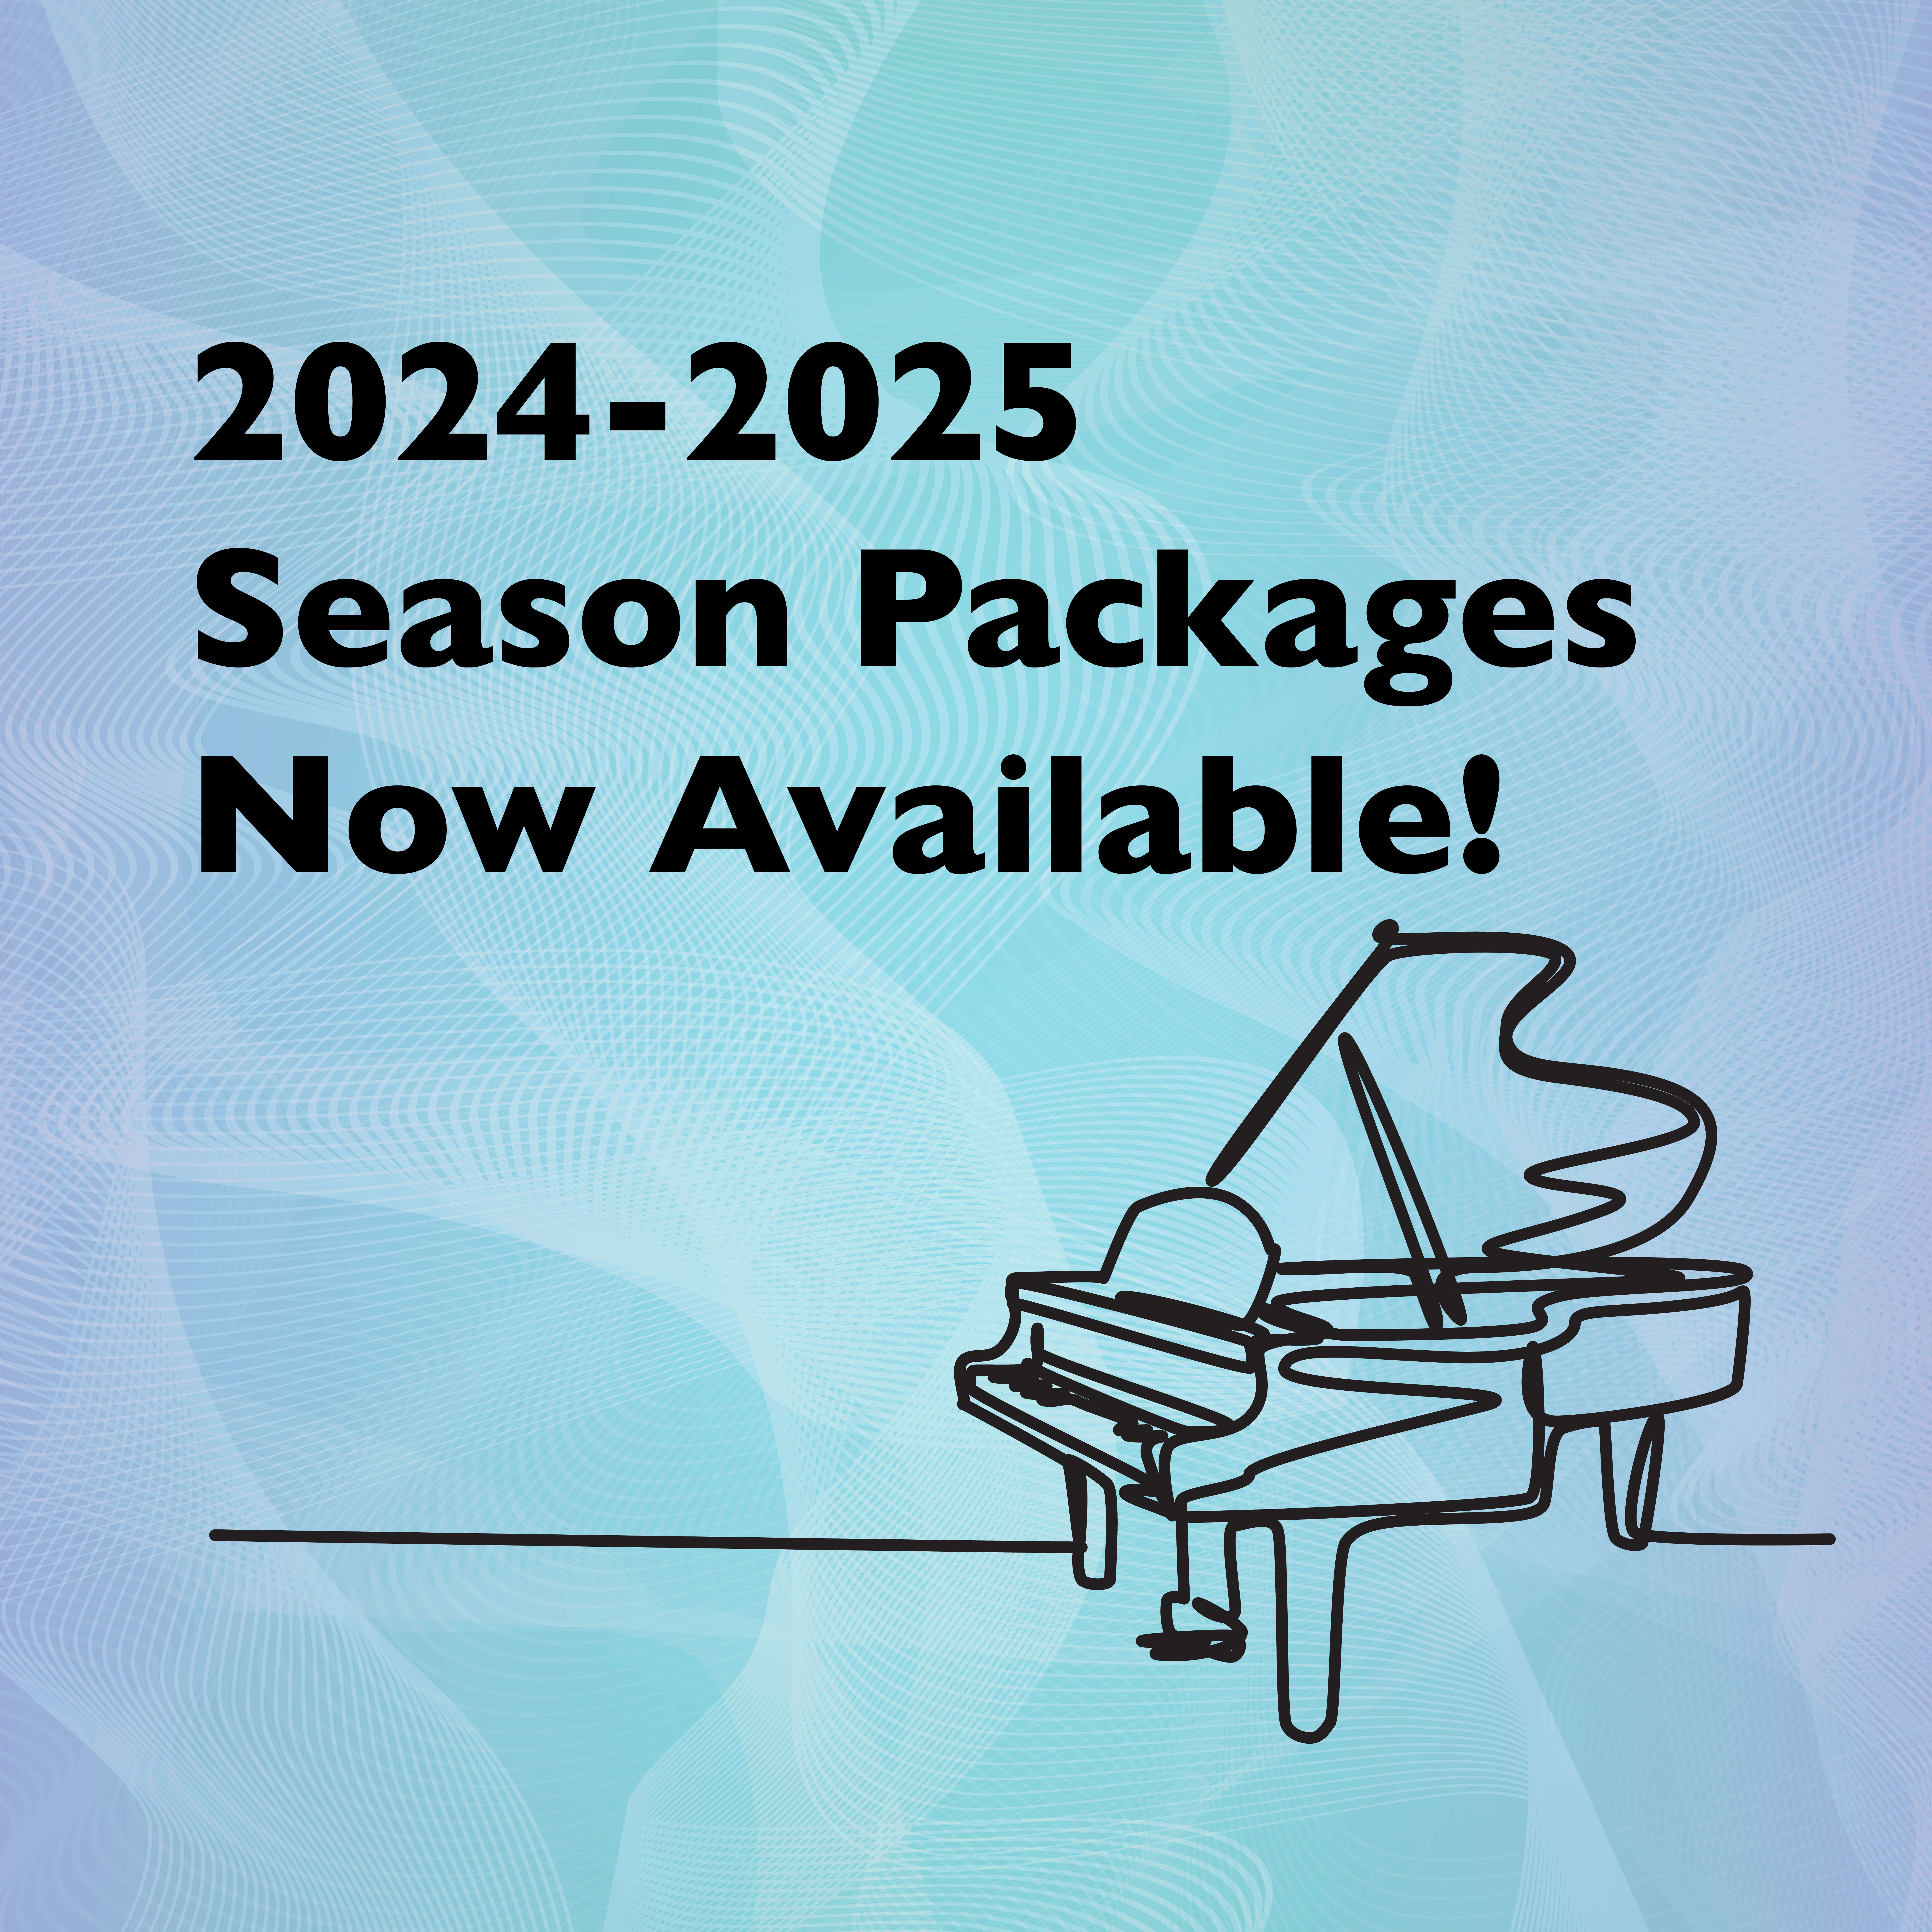 2024-2025 Season Packages Now Available! with line drawing of a grand piano